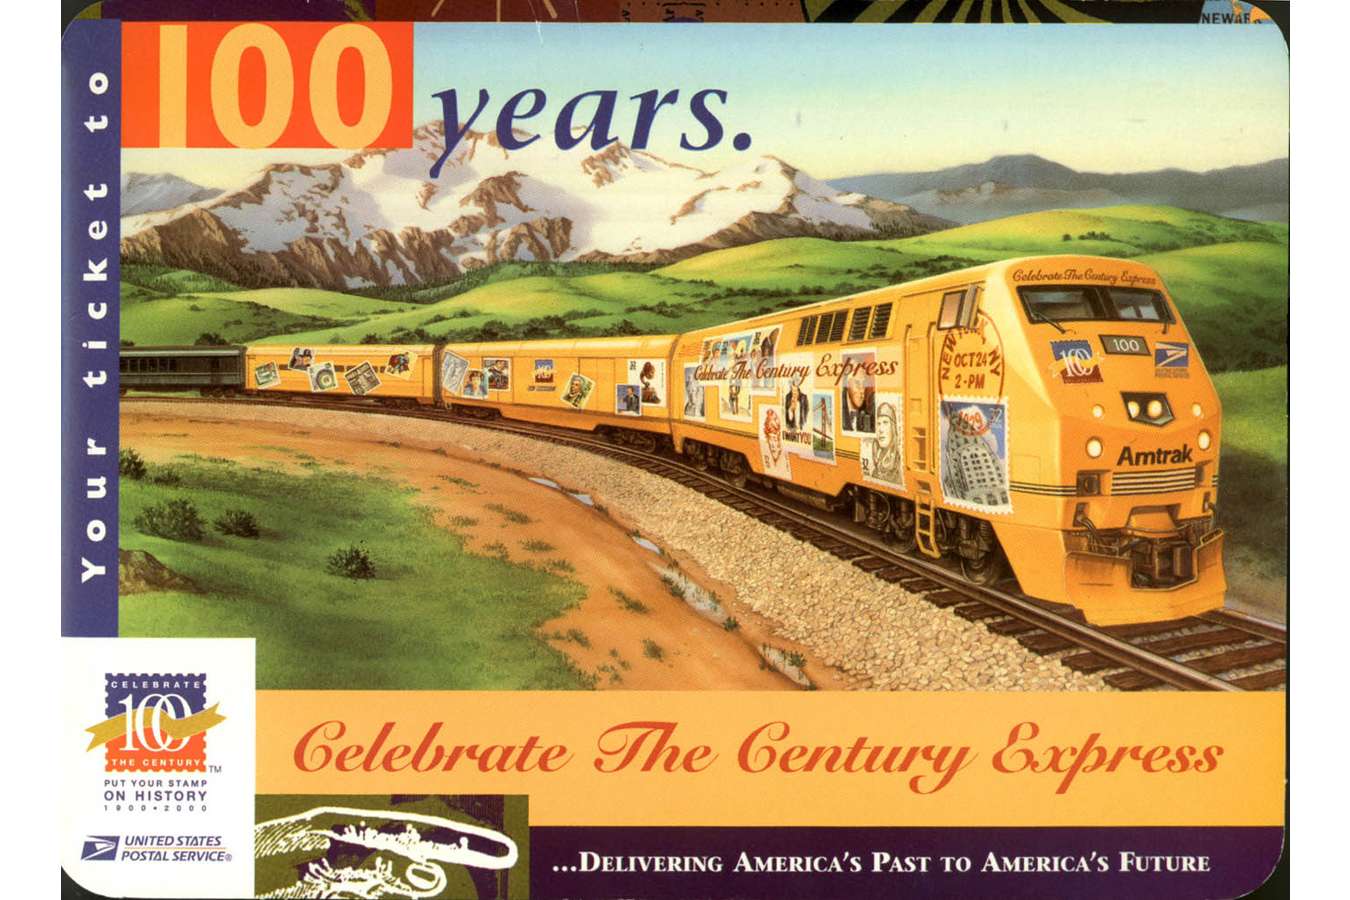 ctc_1broch : Cover of the Educational Brochure Accompanying the CTC Express Train